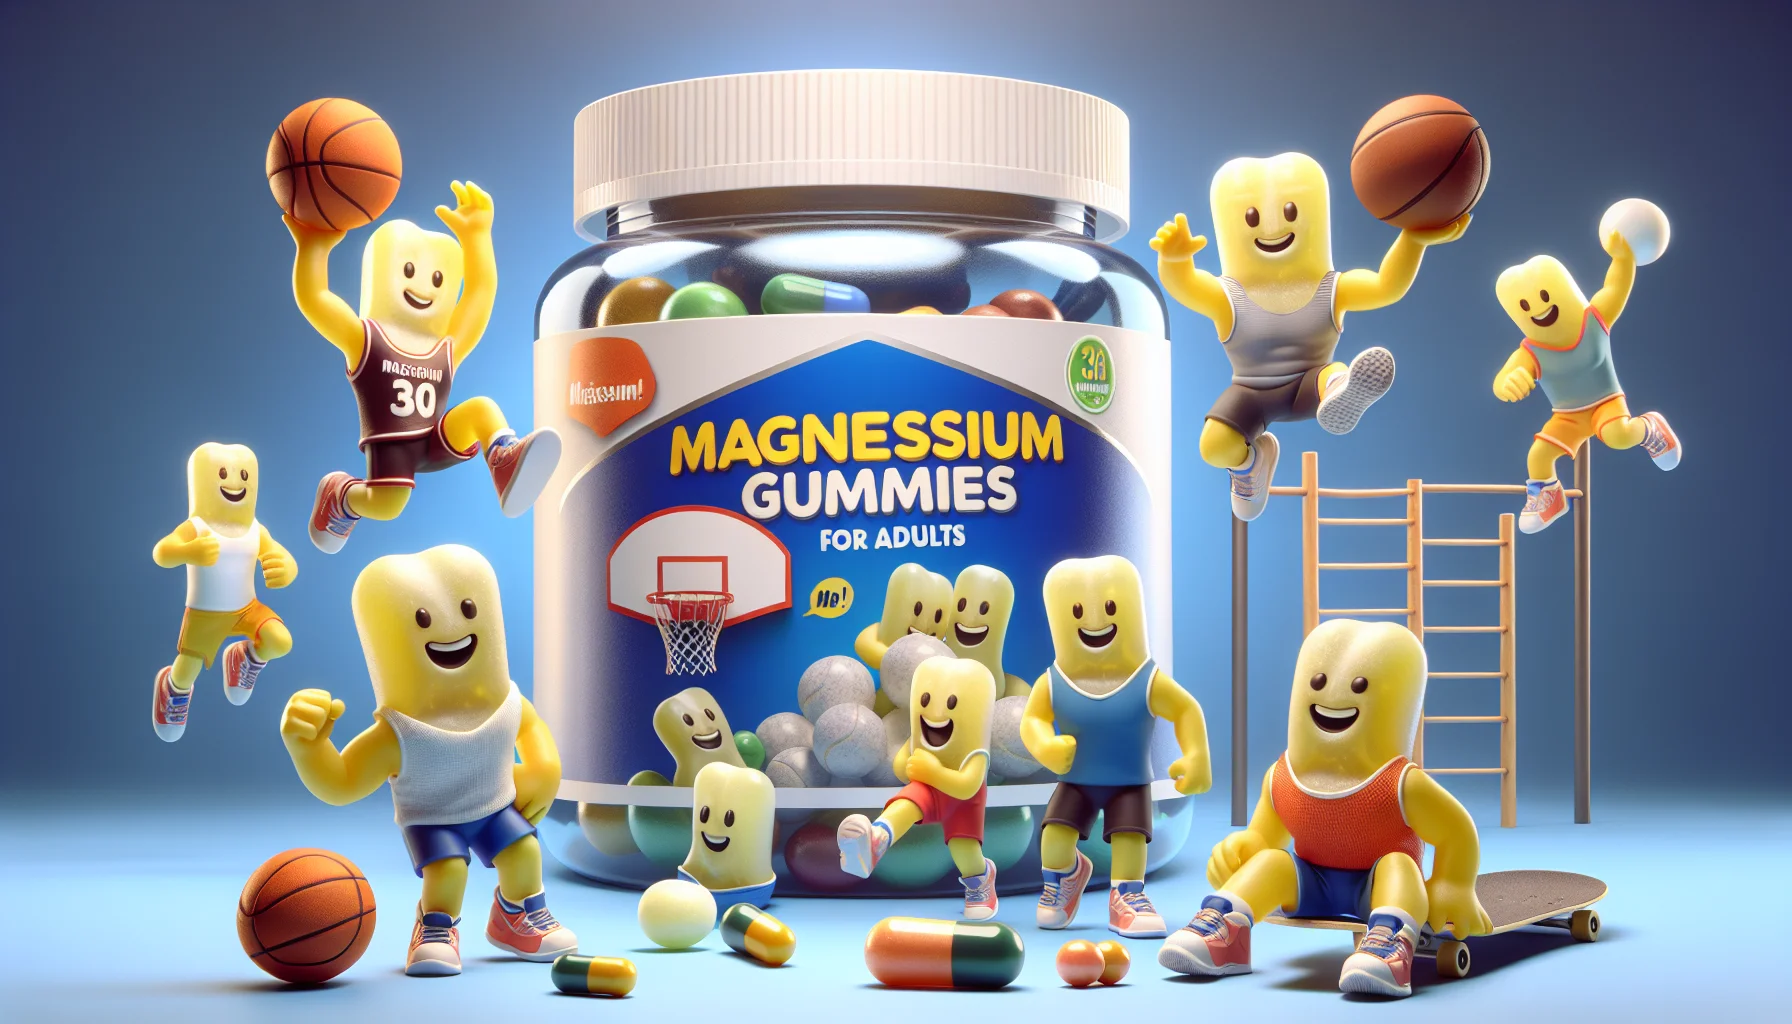 Create an amusing scene featuring a group of anthropomorphic magnesium gummies participating in various sports. One gummy could be dunking a basketball, another hitting a home run in baseball, and another running a marathon, all with smiling faces. They are wearing athletic gear to signify their active, sporty nature. The background shows a large bottle of magnesium gummies for adults, which is watching the gummy shenanigans and laughing along, giving an appealing and lively visual to promote the usage of supplements for sports activities.